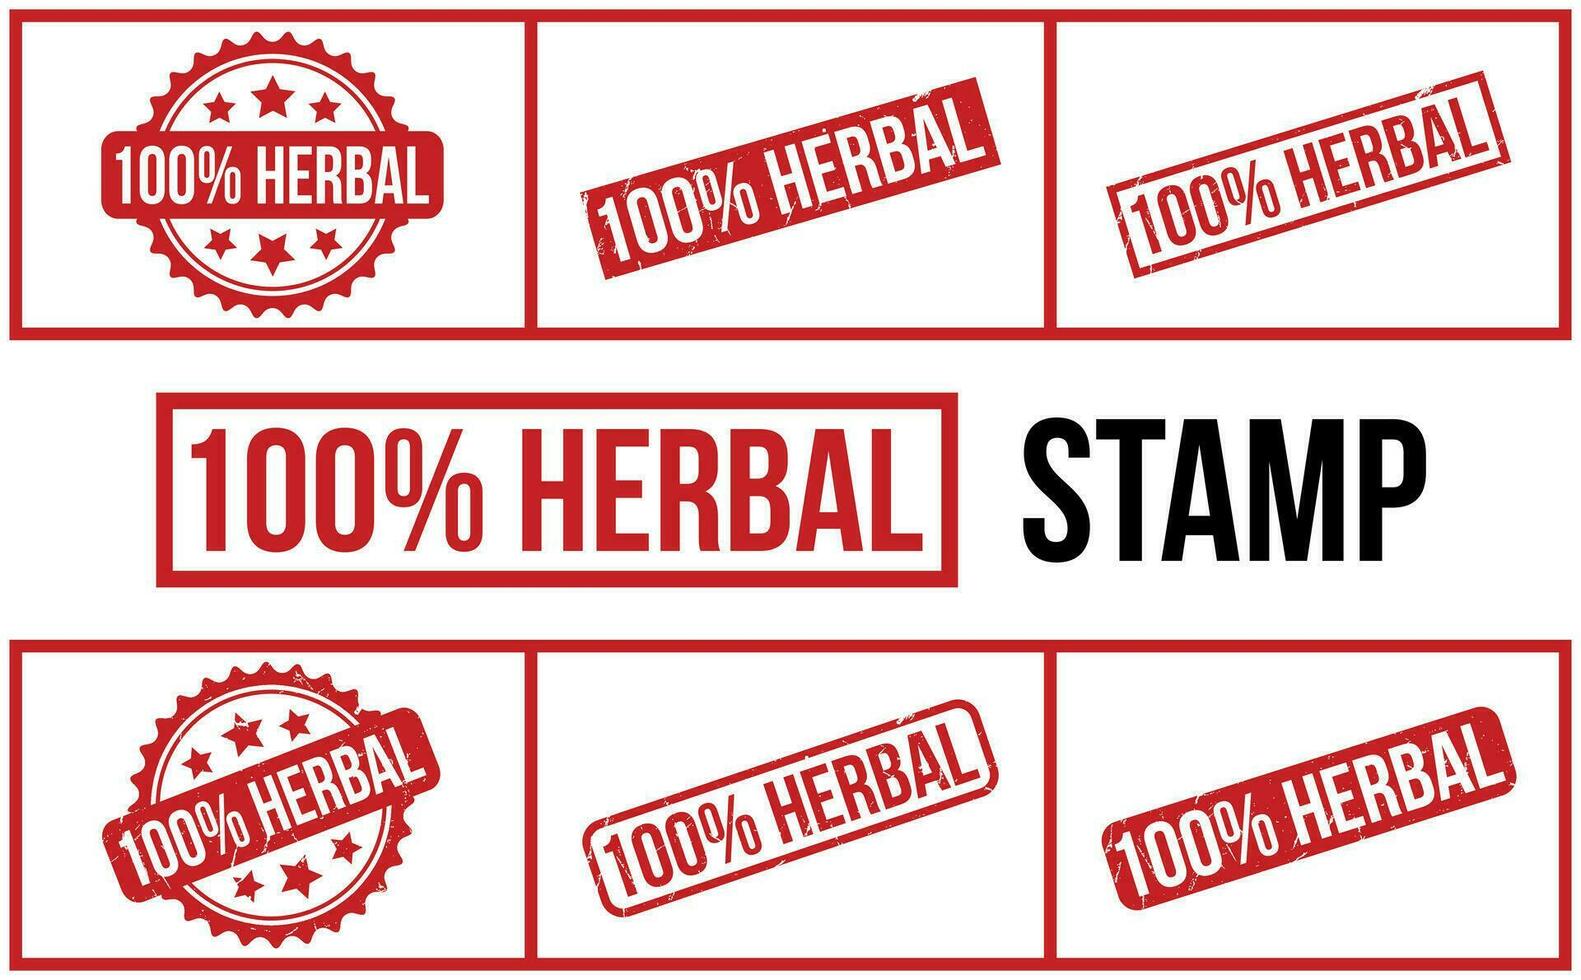 100 Percent Herbal rubber grunge stamp seal vector